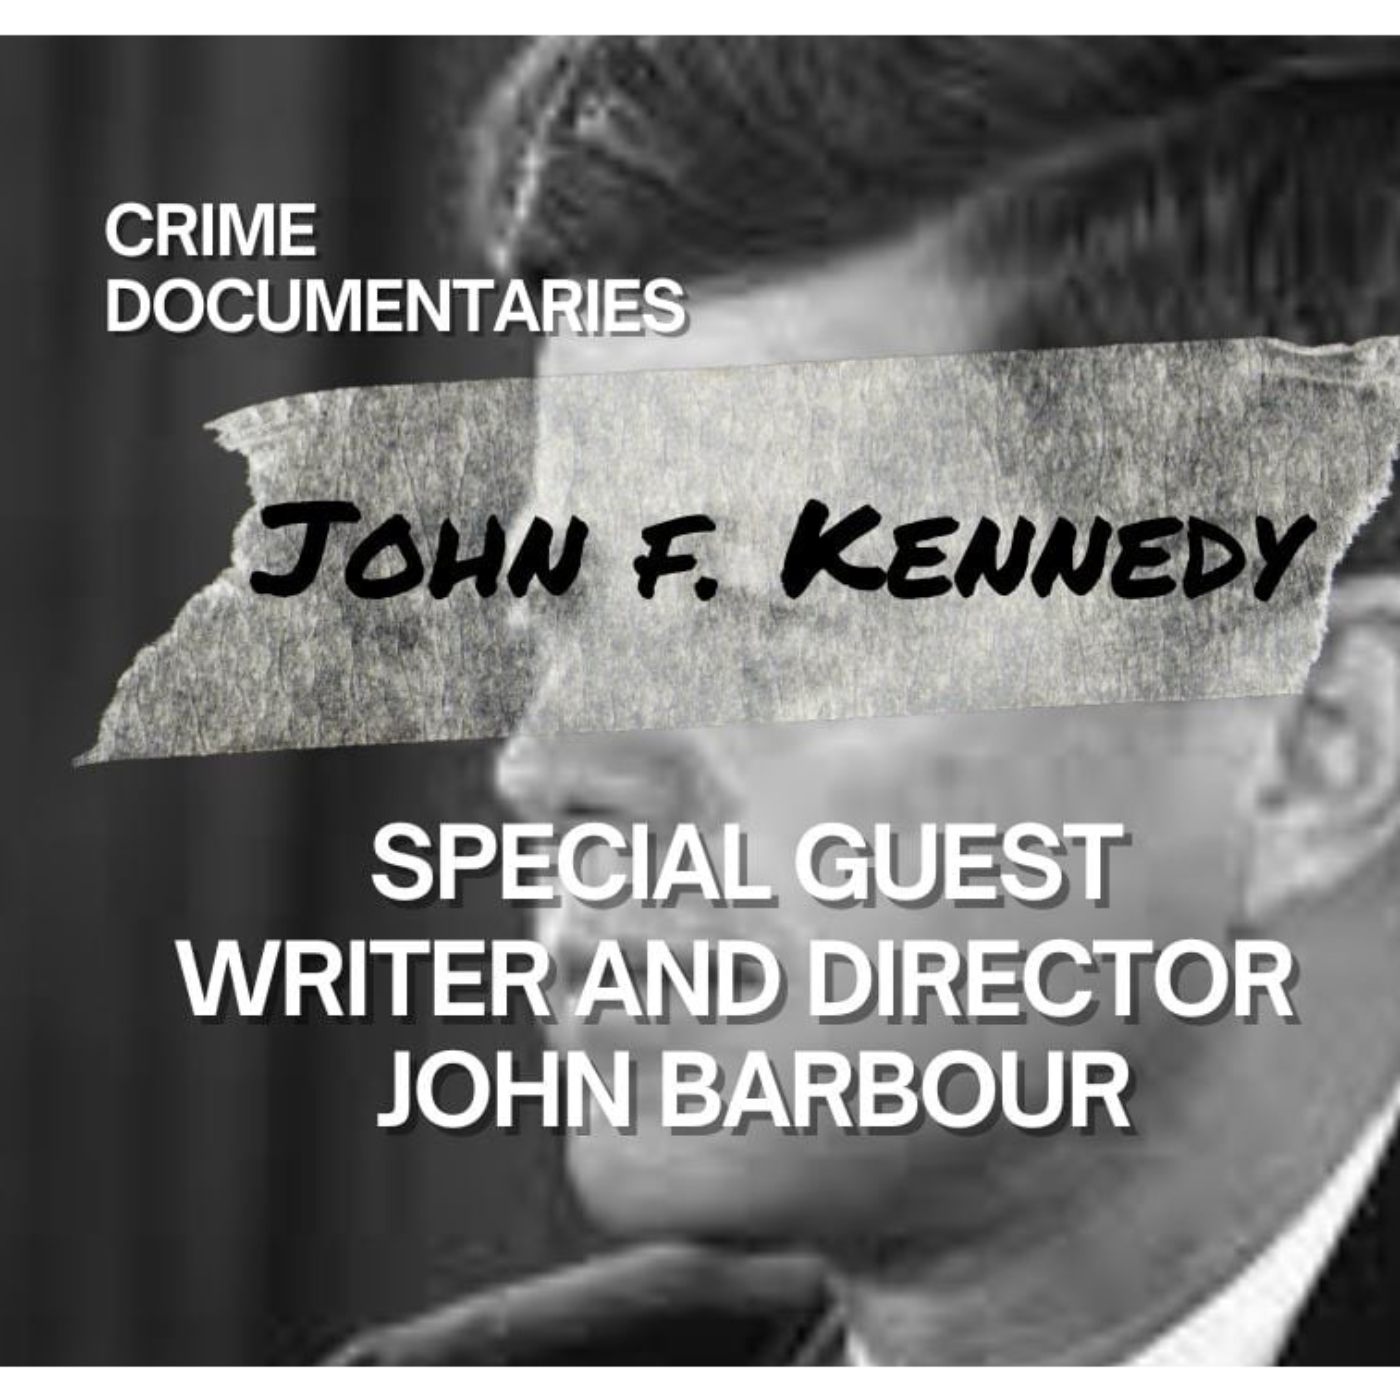 John Barbour Interview Live This Sunday Only On Crime Documentaries!